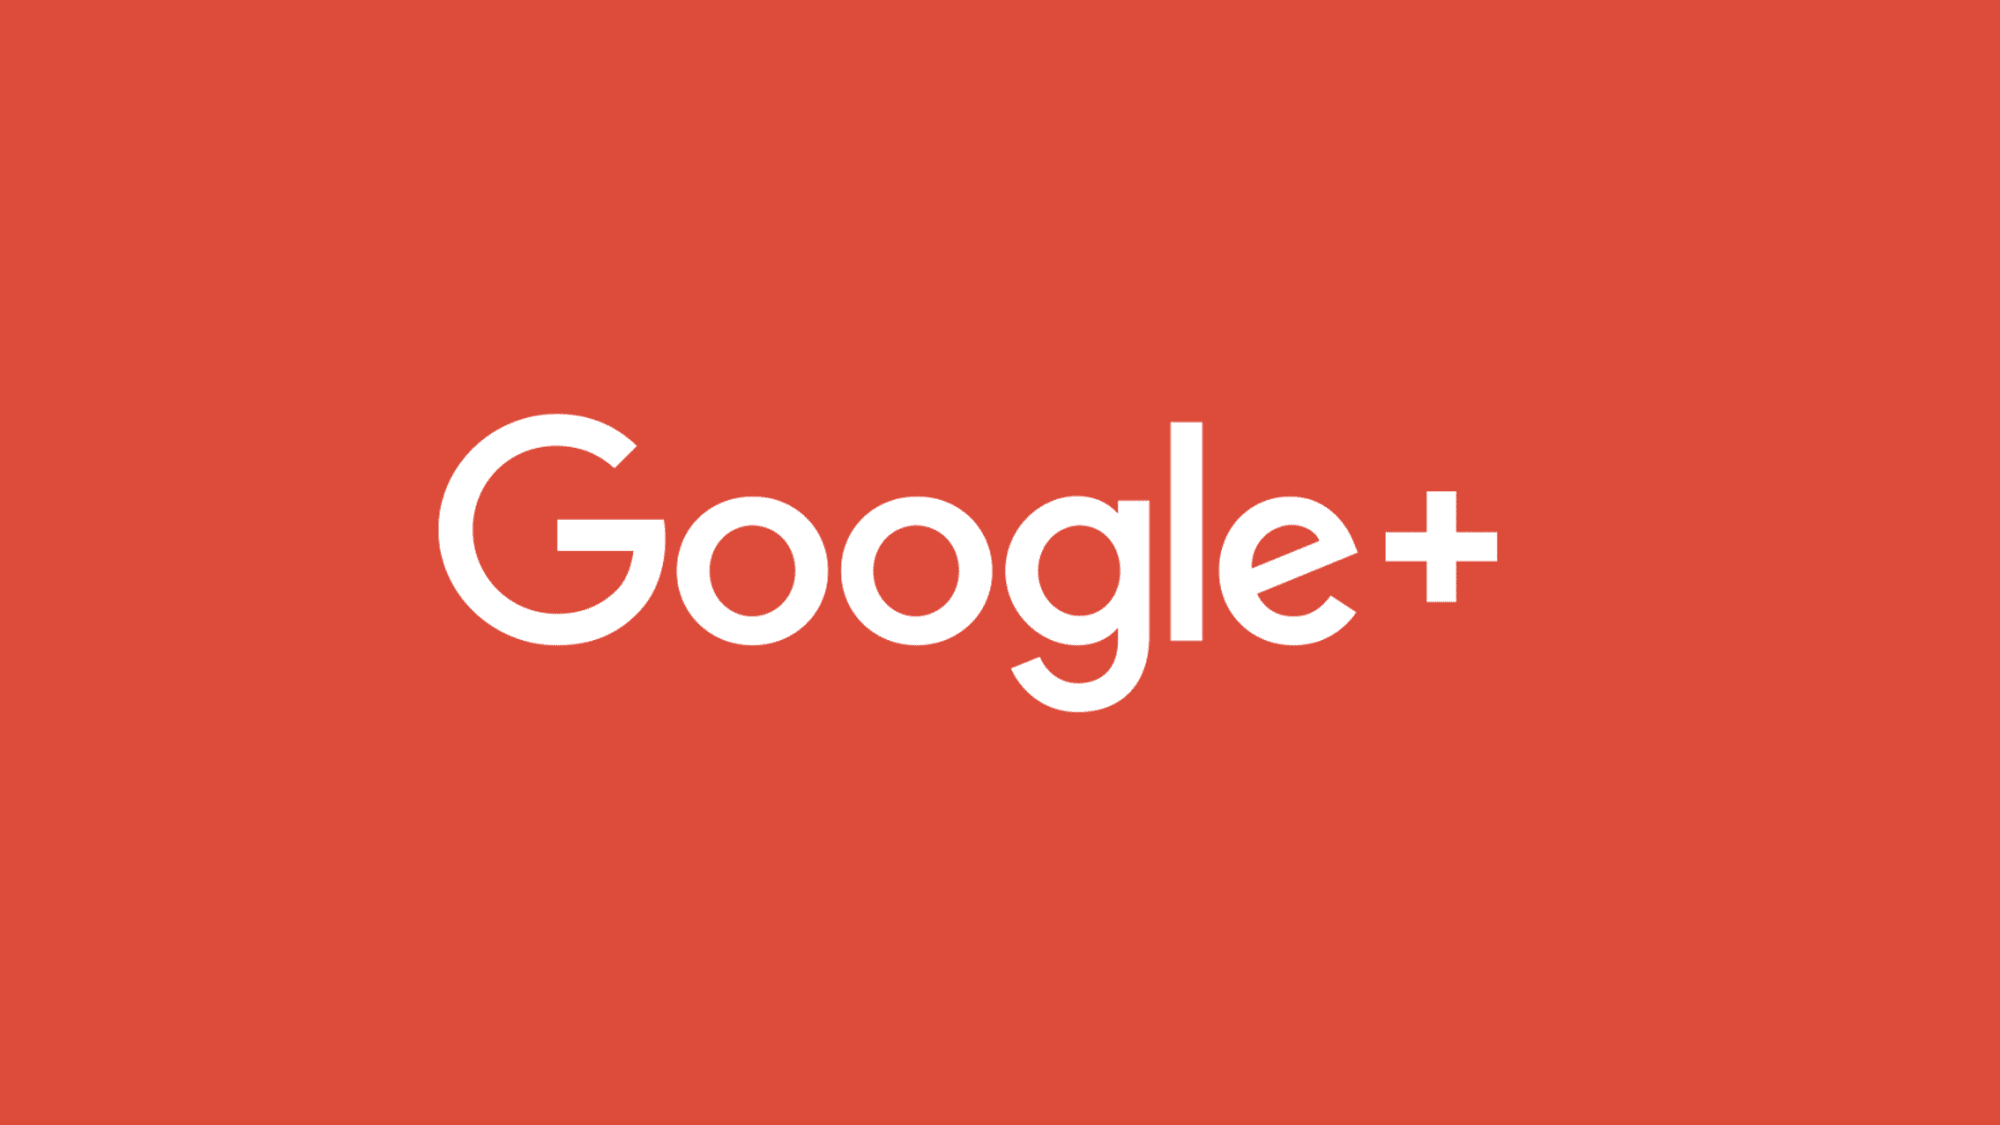 Google Plus Graveyard: Once You Sign Up, You Never Come Back